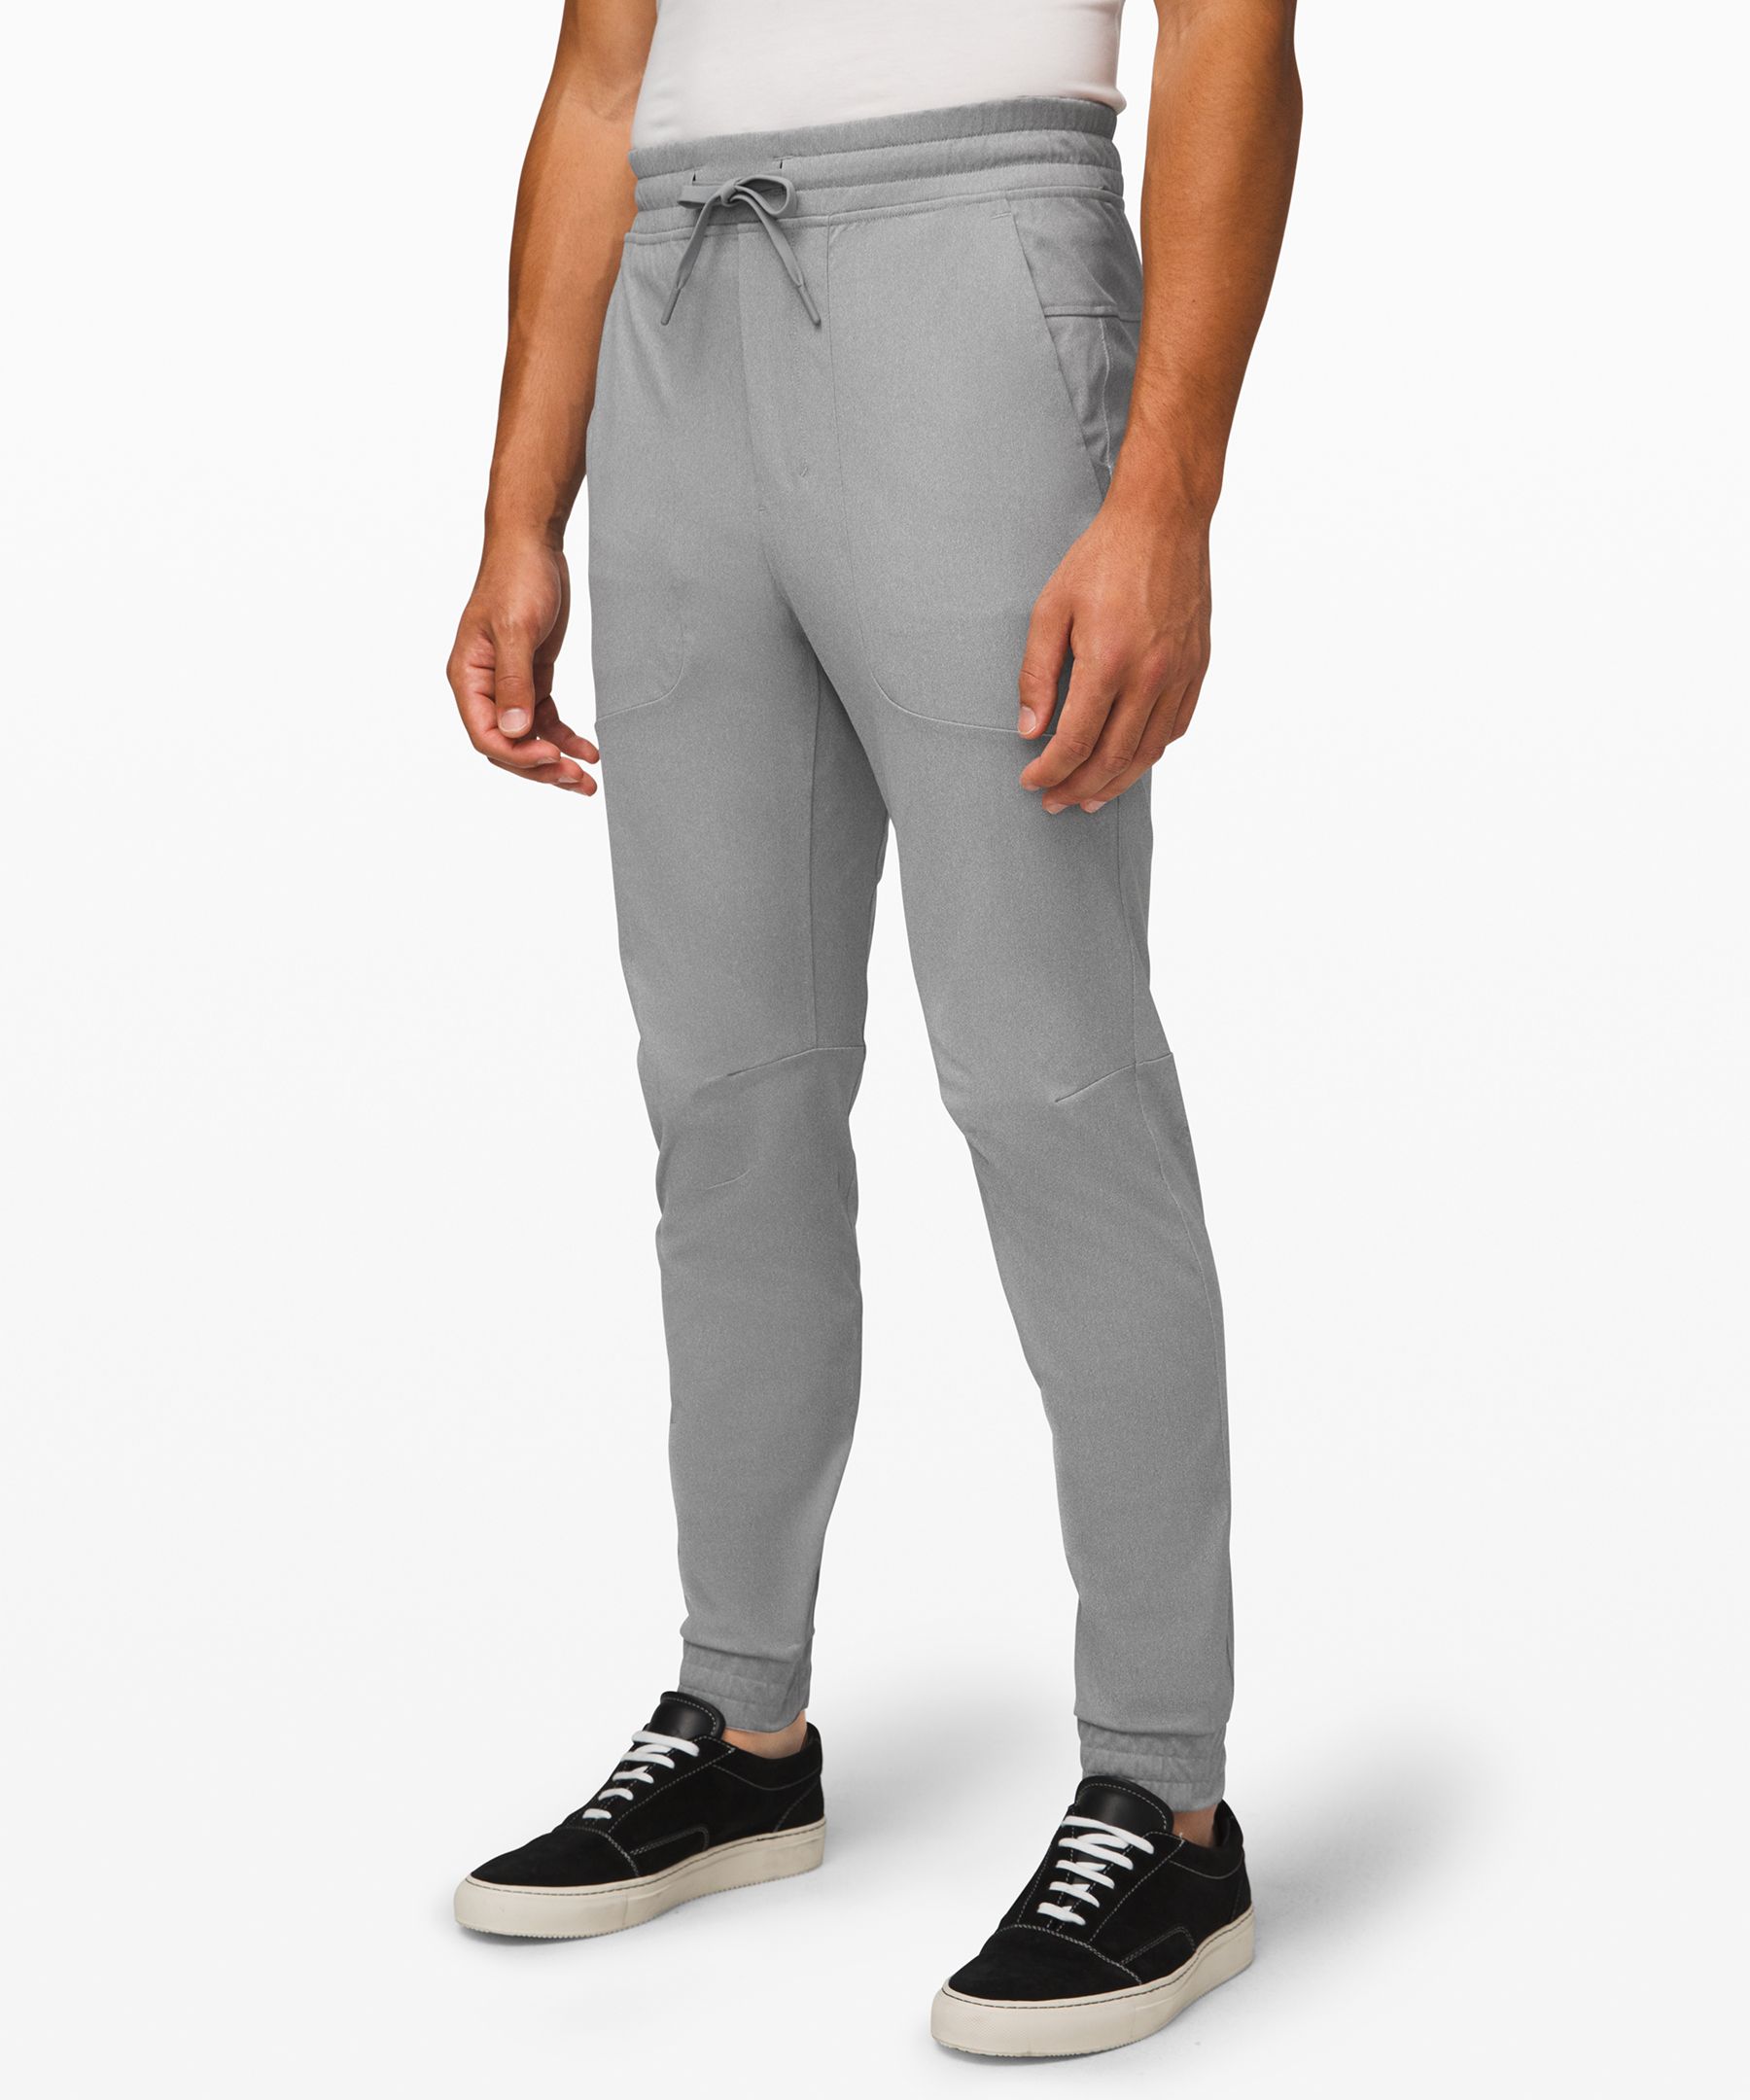 abc joggers review